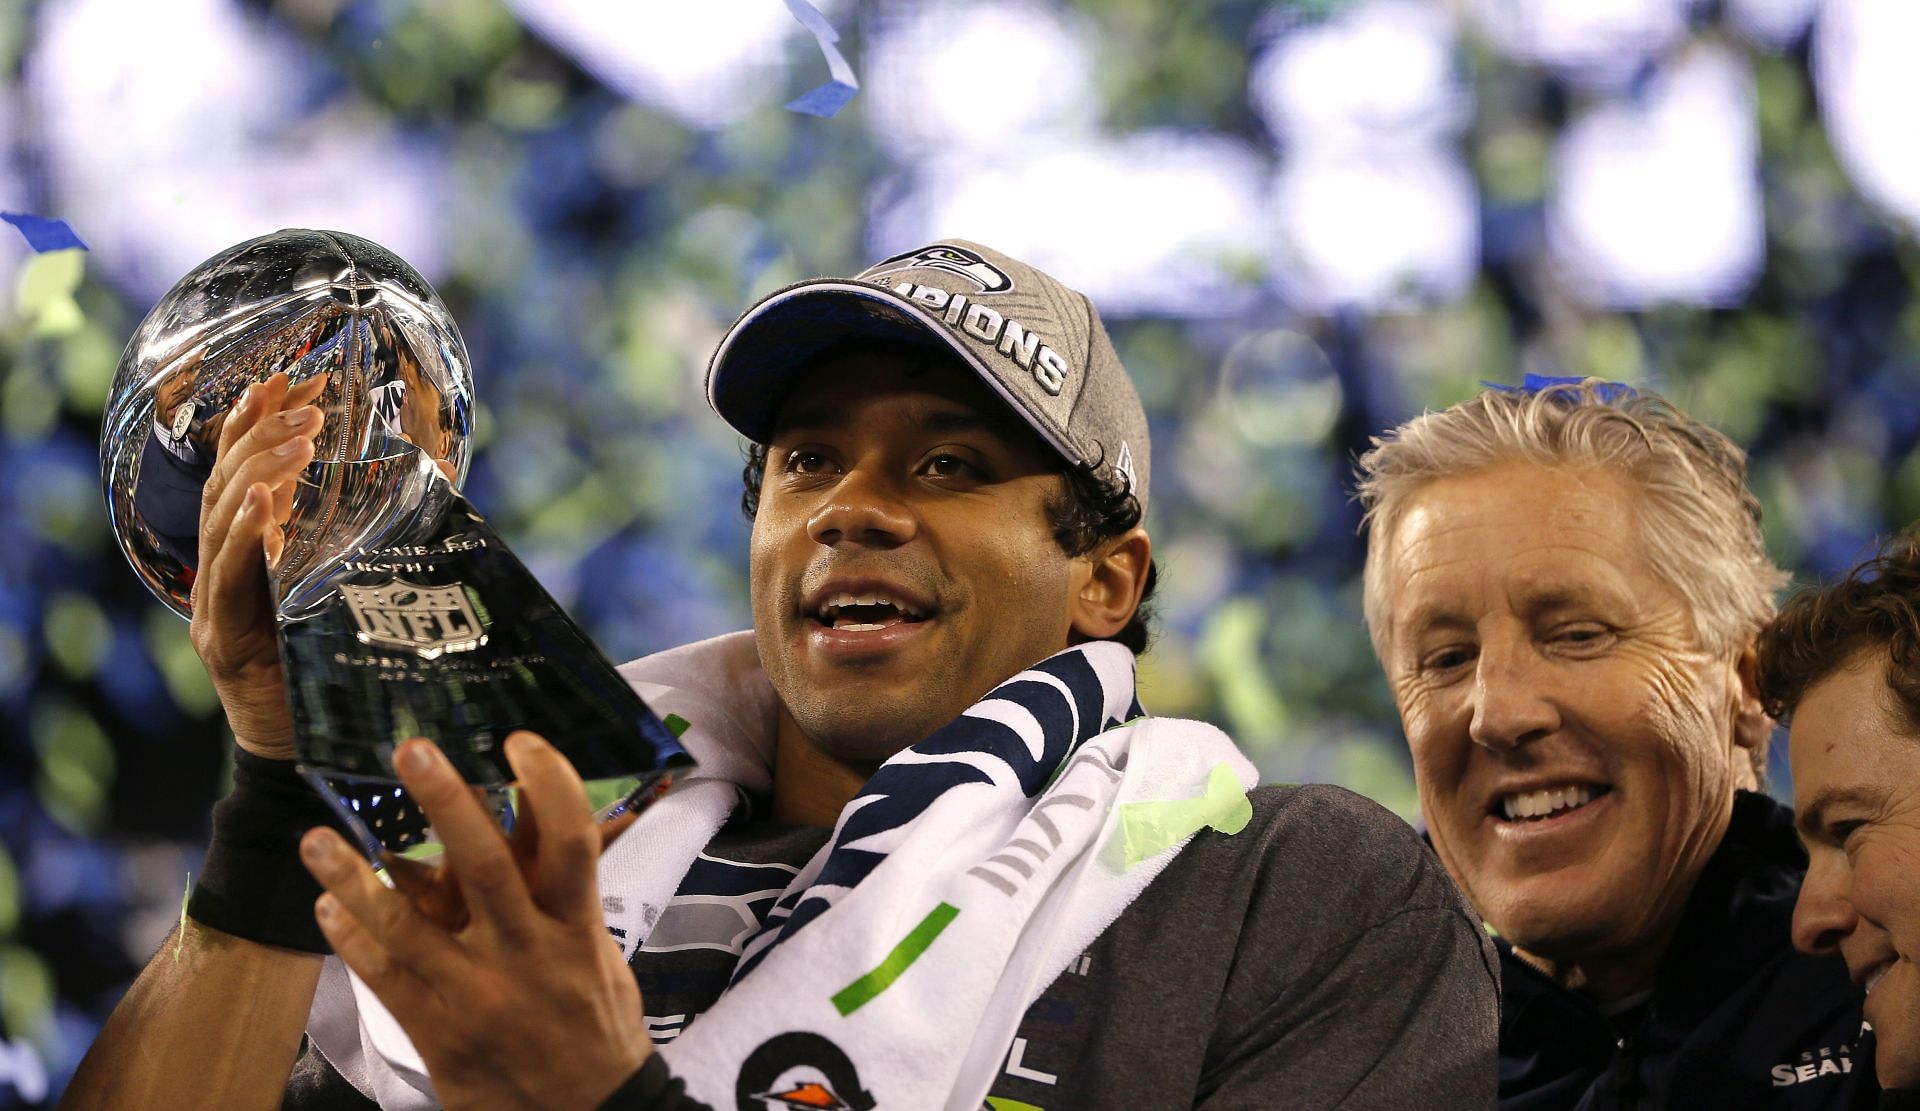 Russell Wilson during his time with the Seattle Seahawks